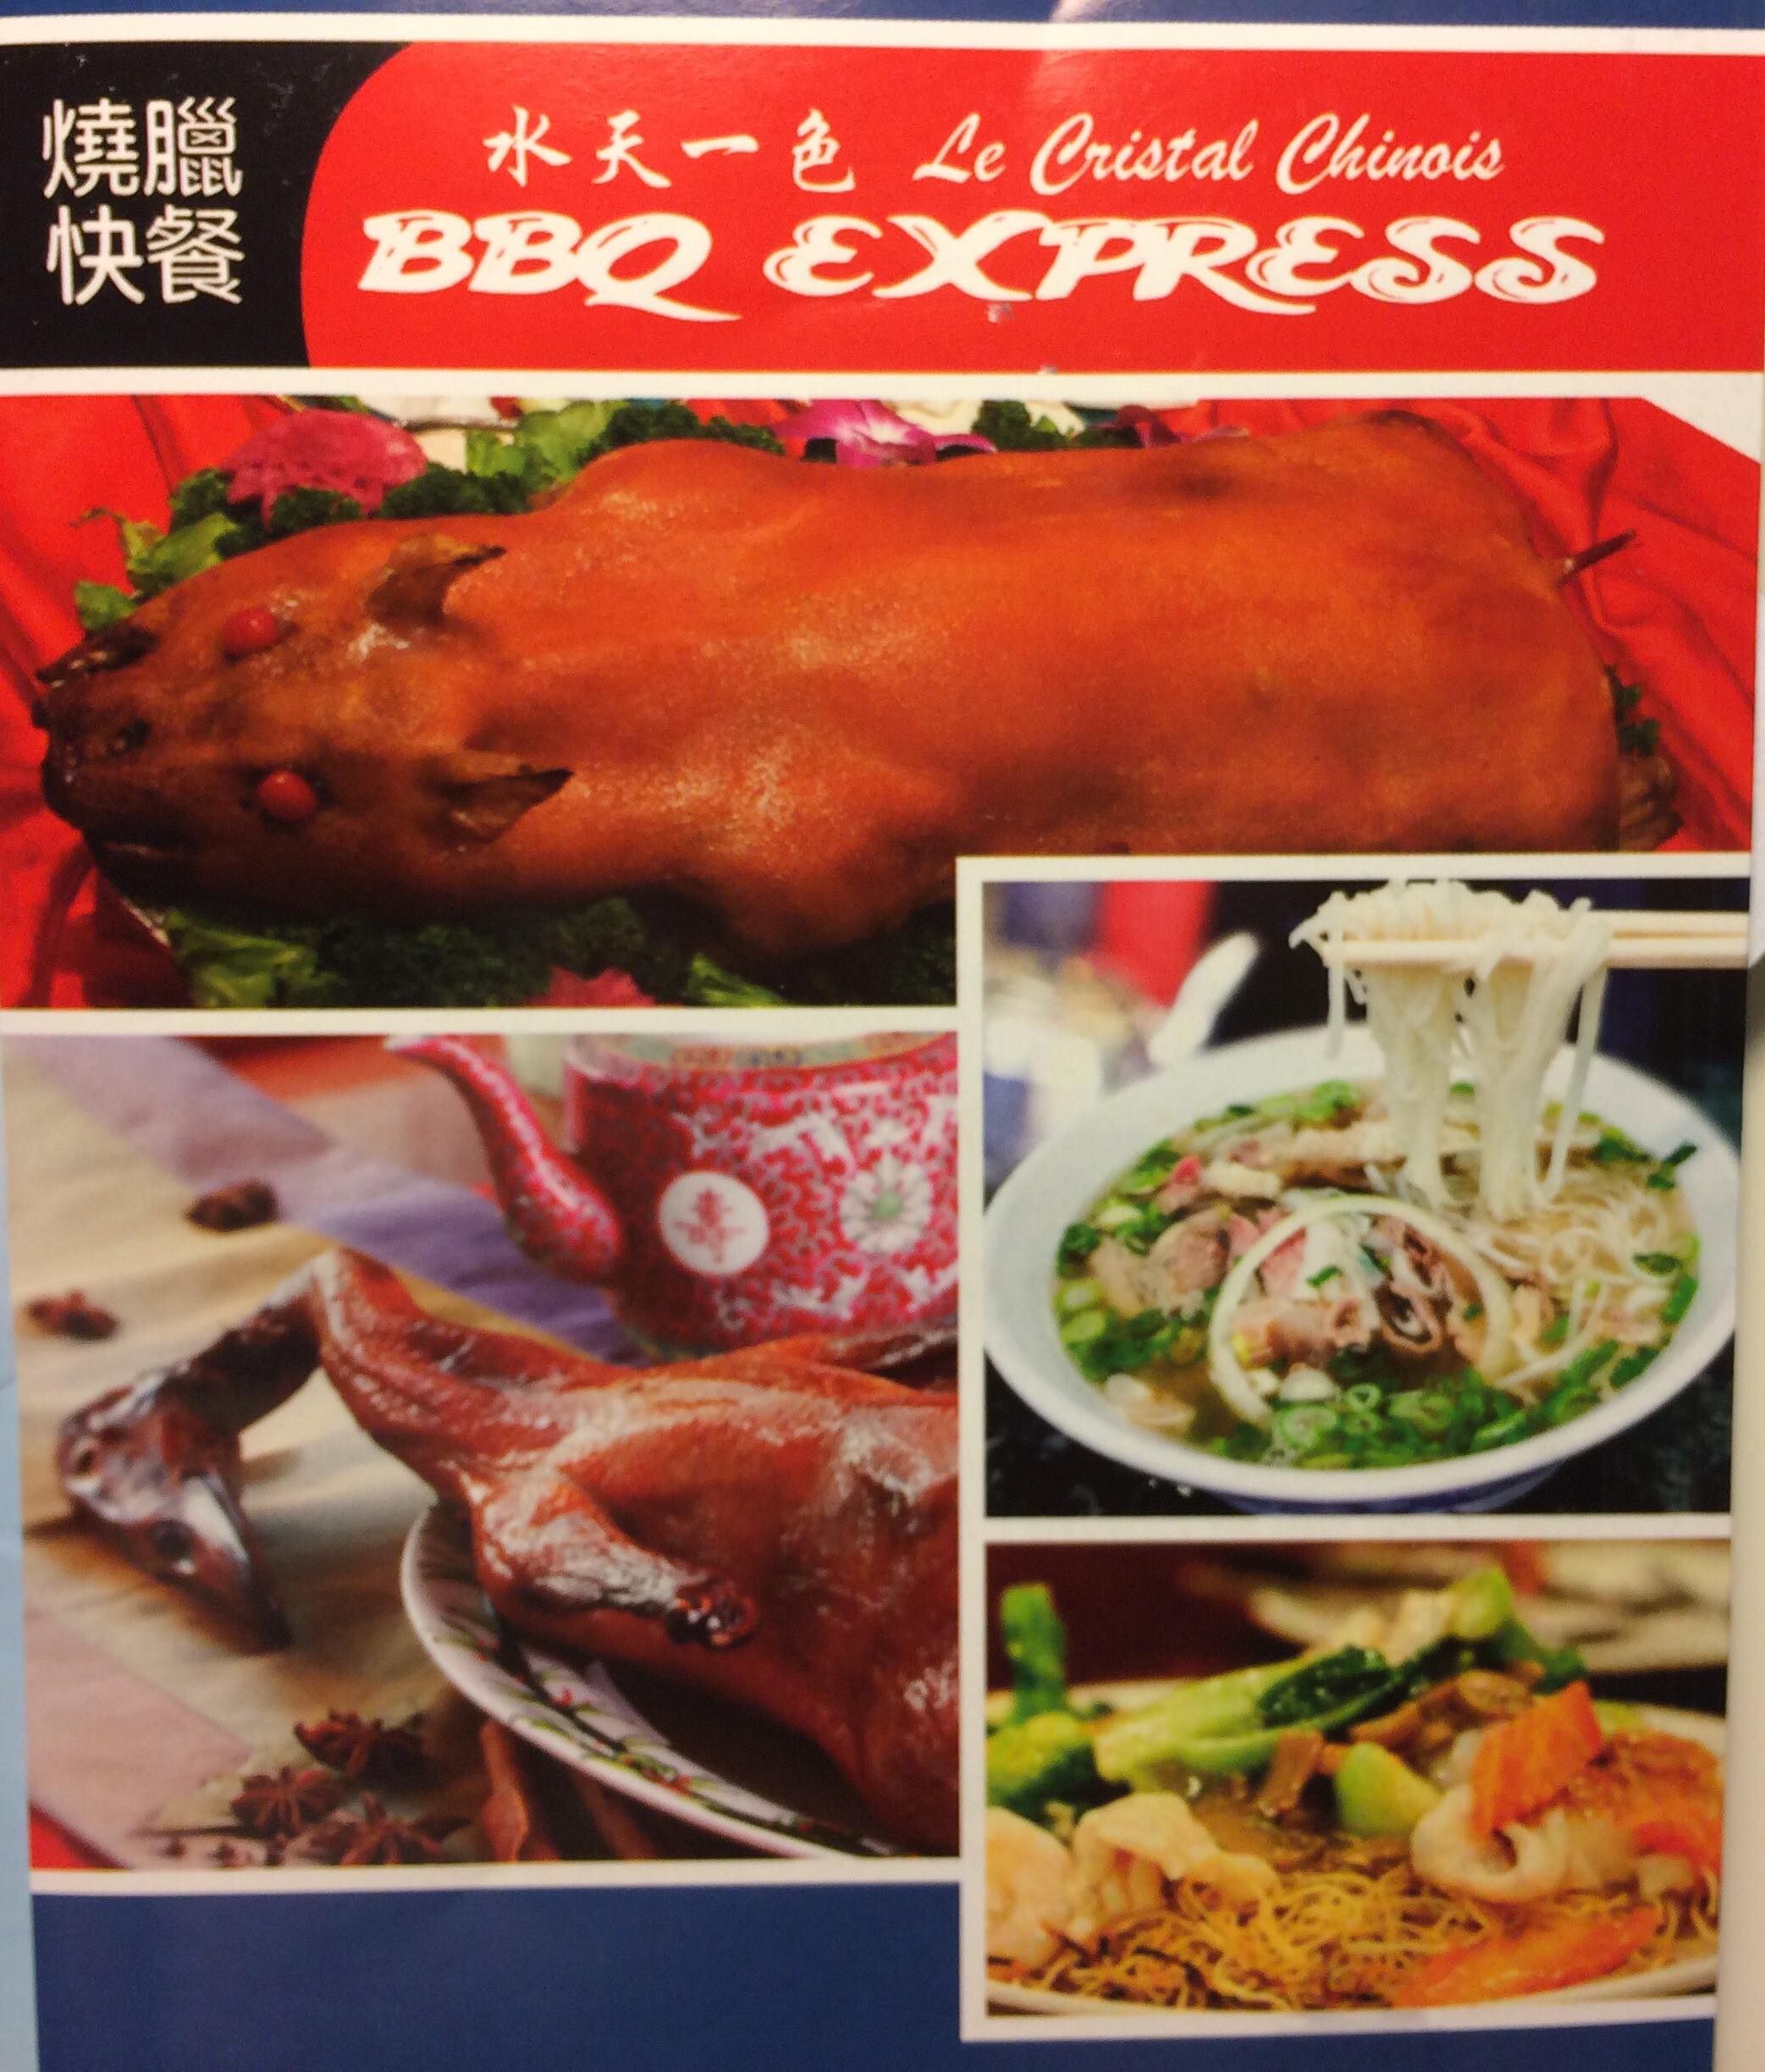 Le Cristal Chinois & BBQ Express - Restaurant